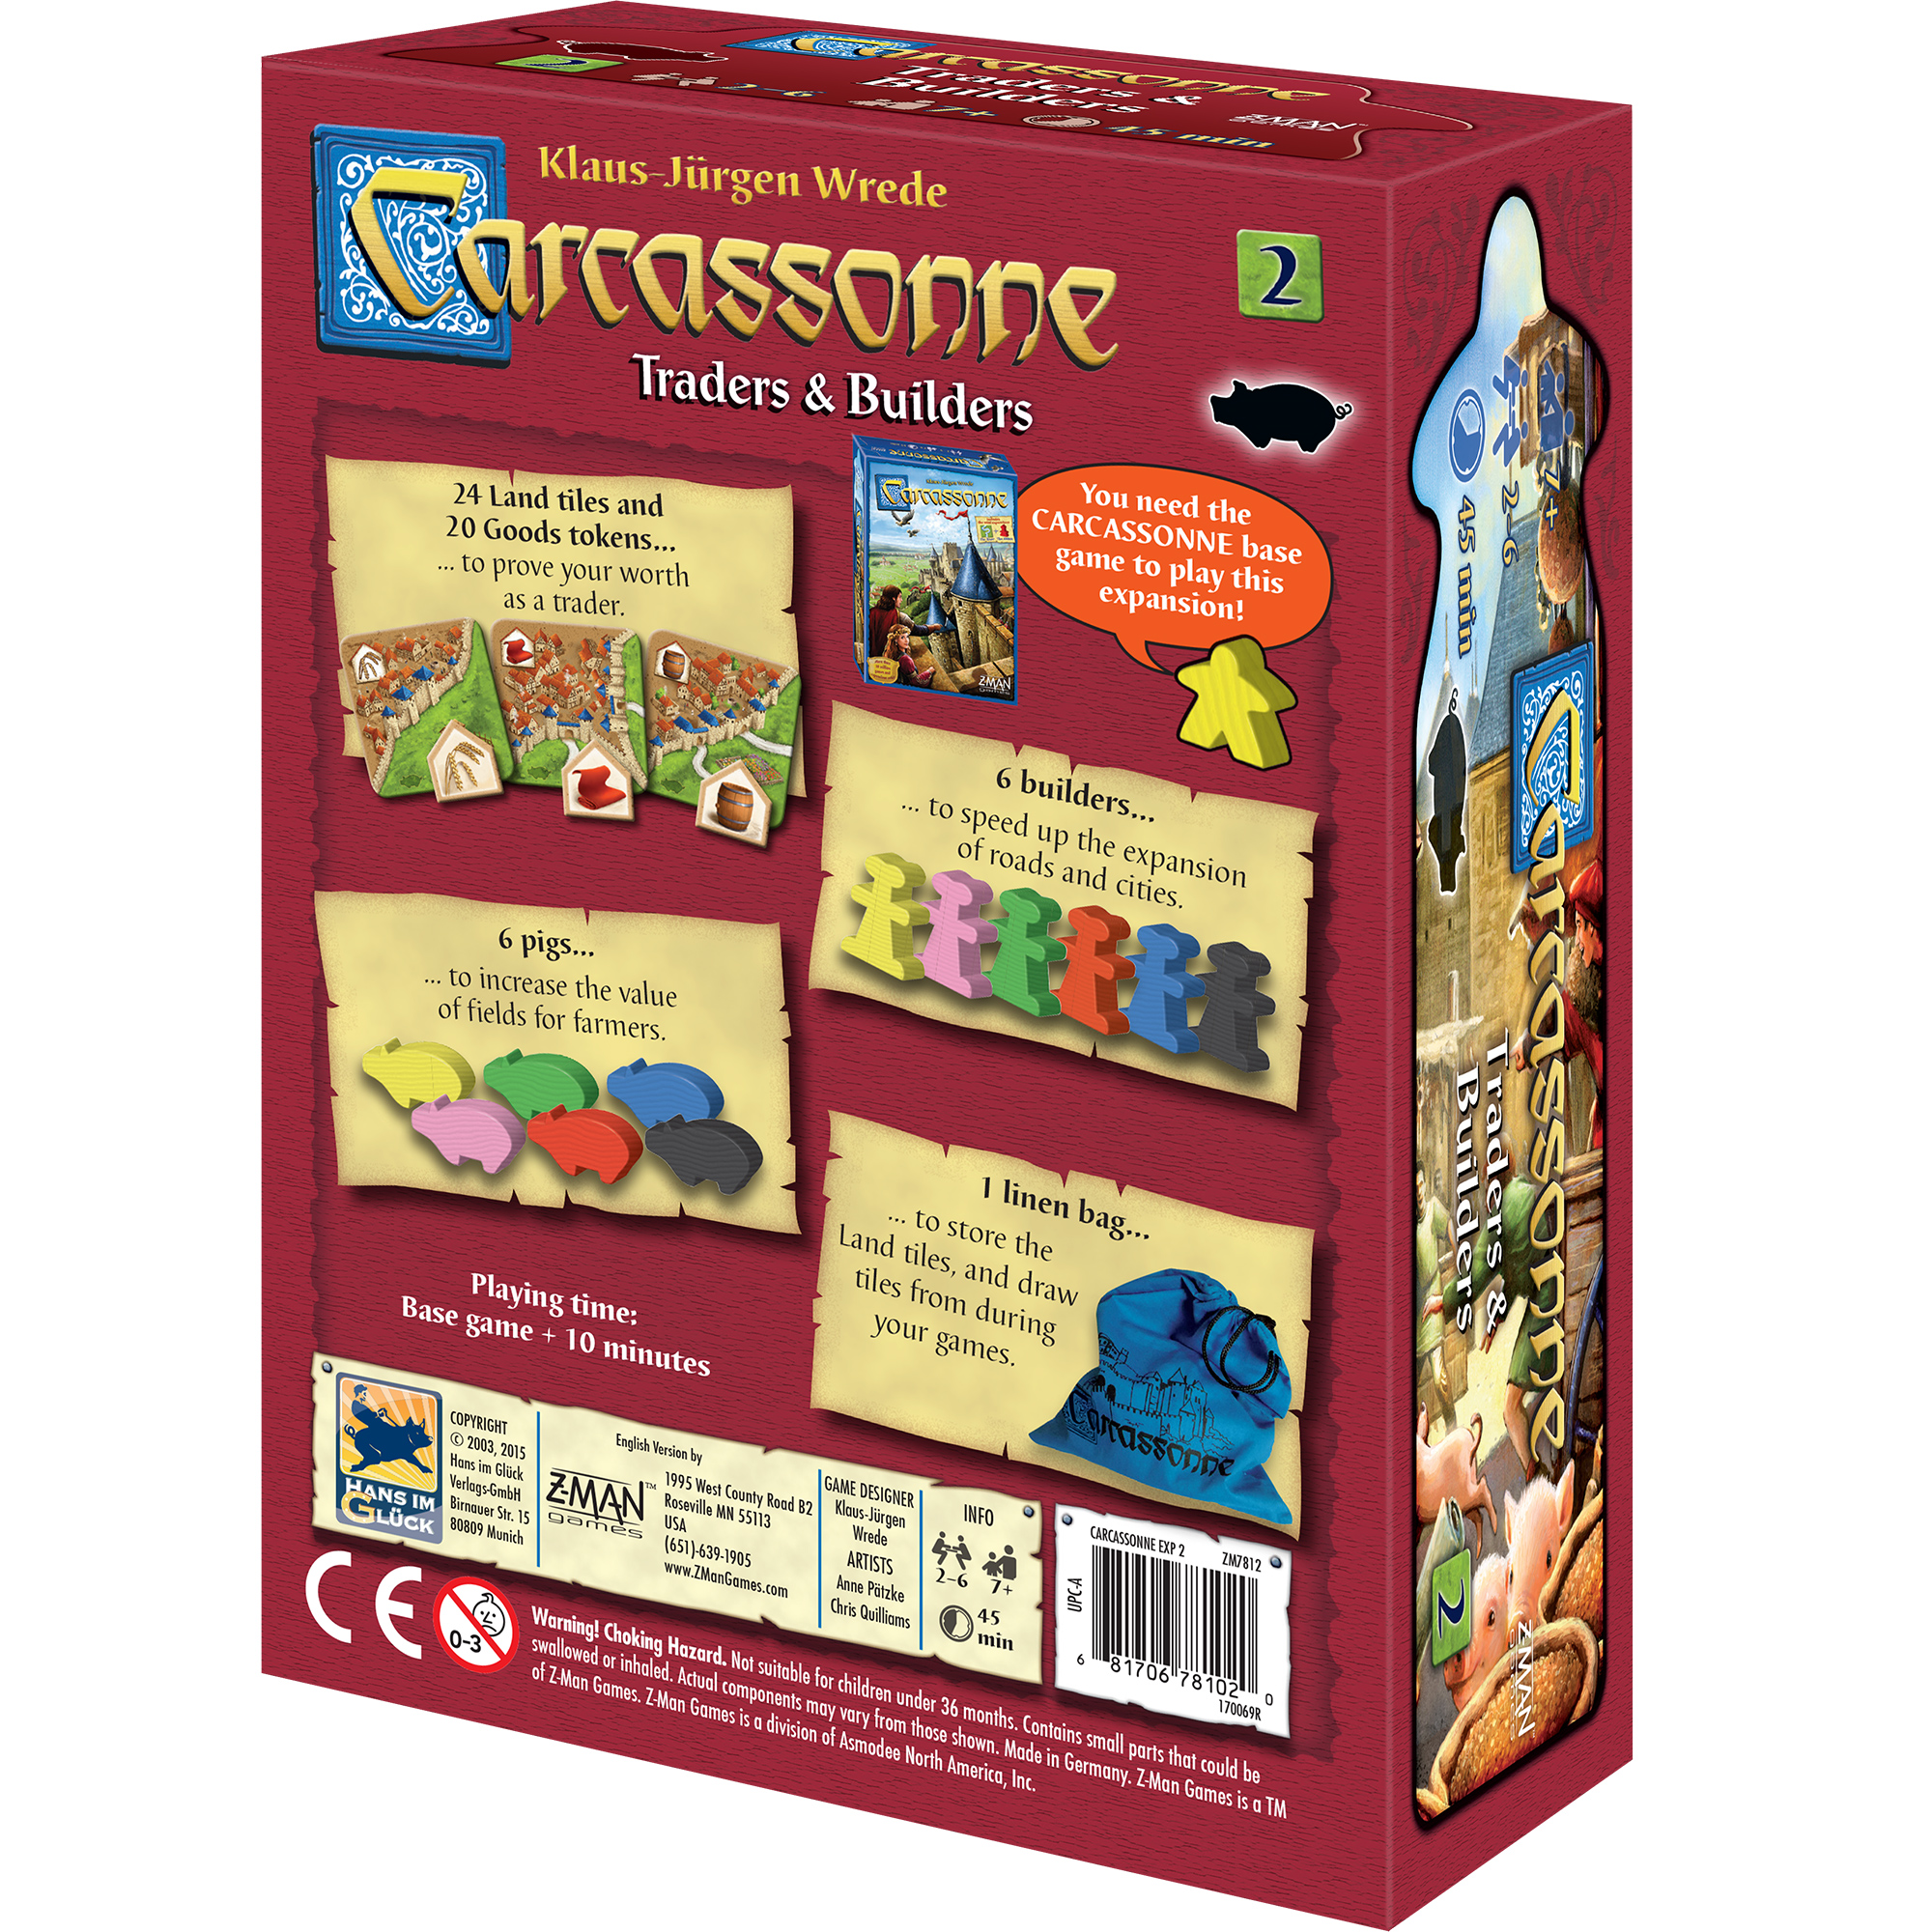 Carcassonne Expansion 2: Traders & Builders Board Game for Ages 7 and Up, from Asmodee - image 3 of 7